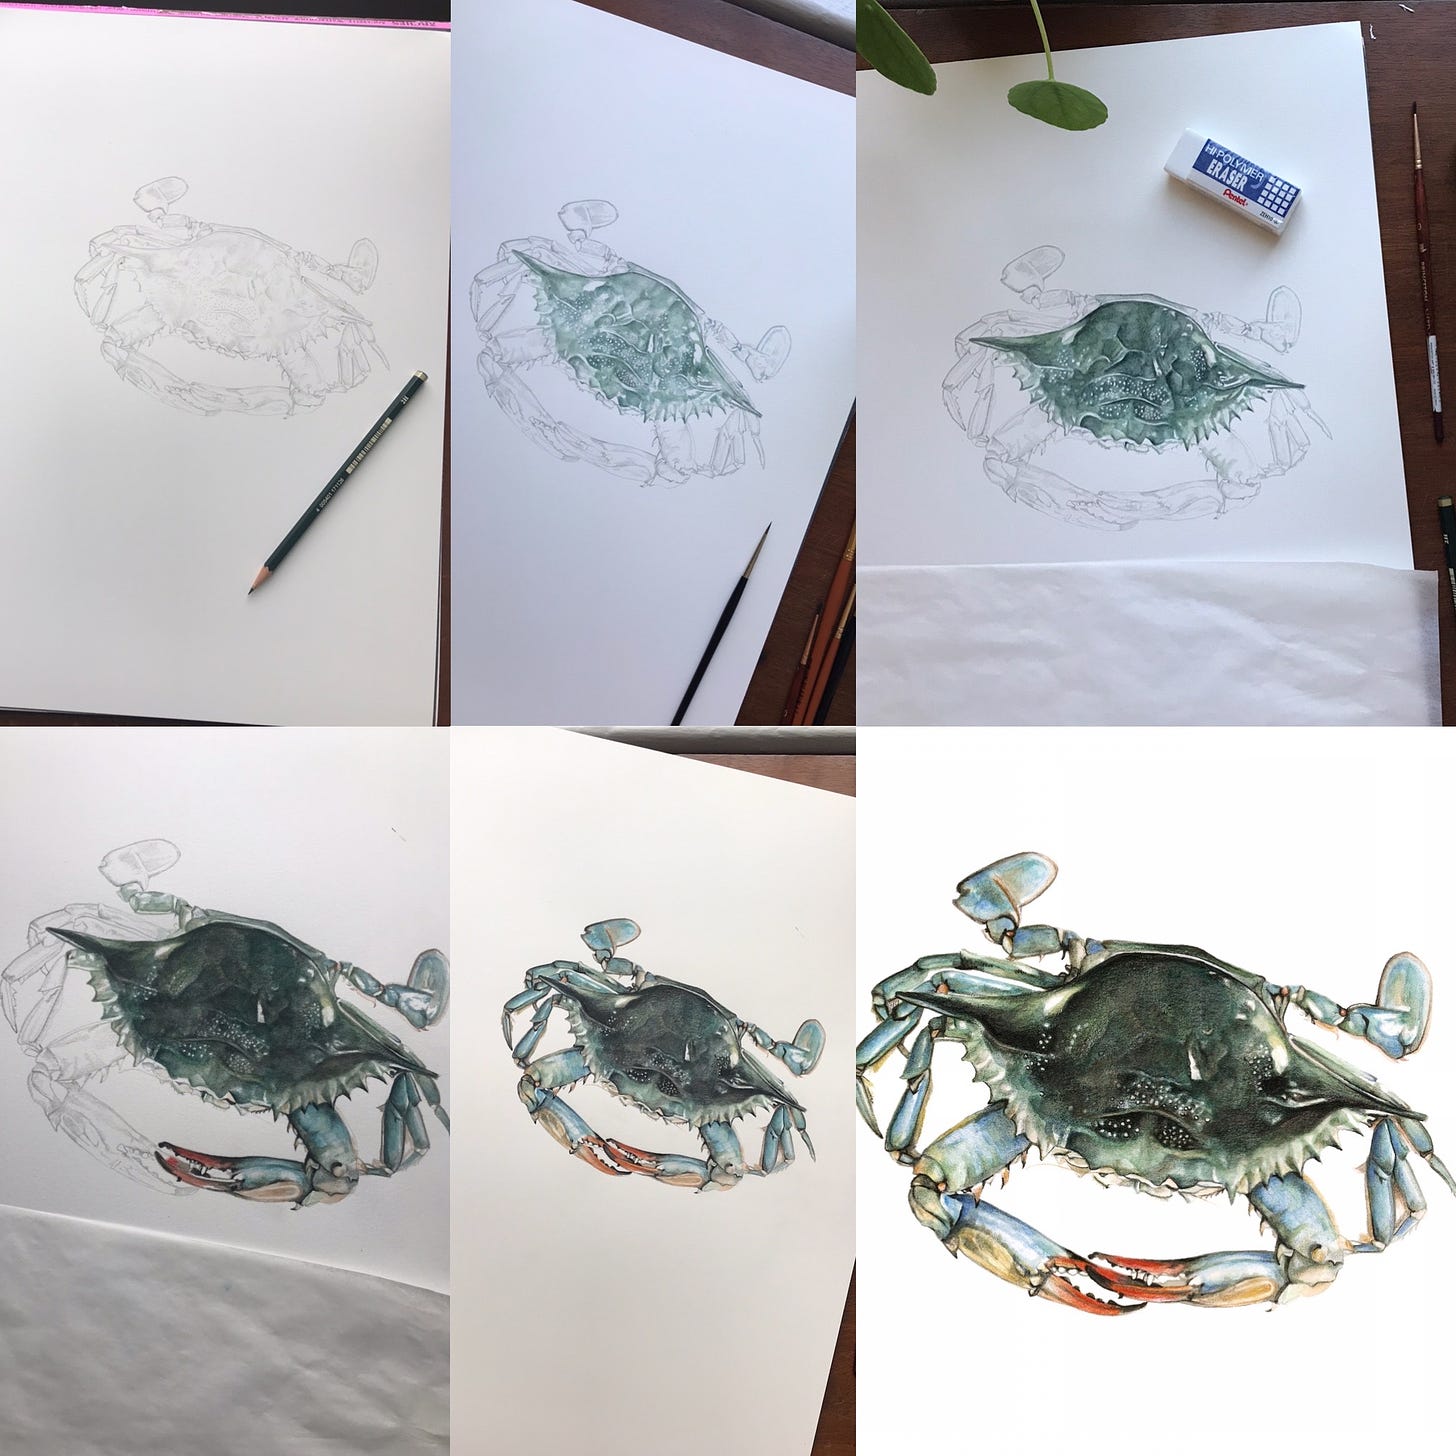 6 images of the process of creating the crab watercolor, beginning to end 